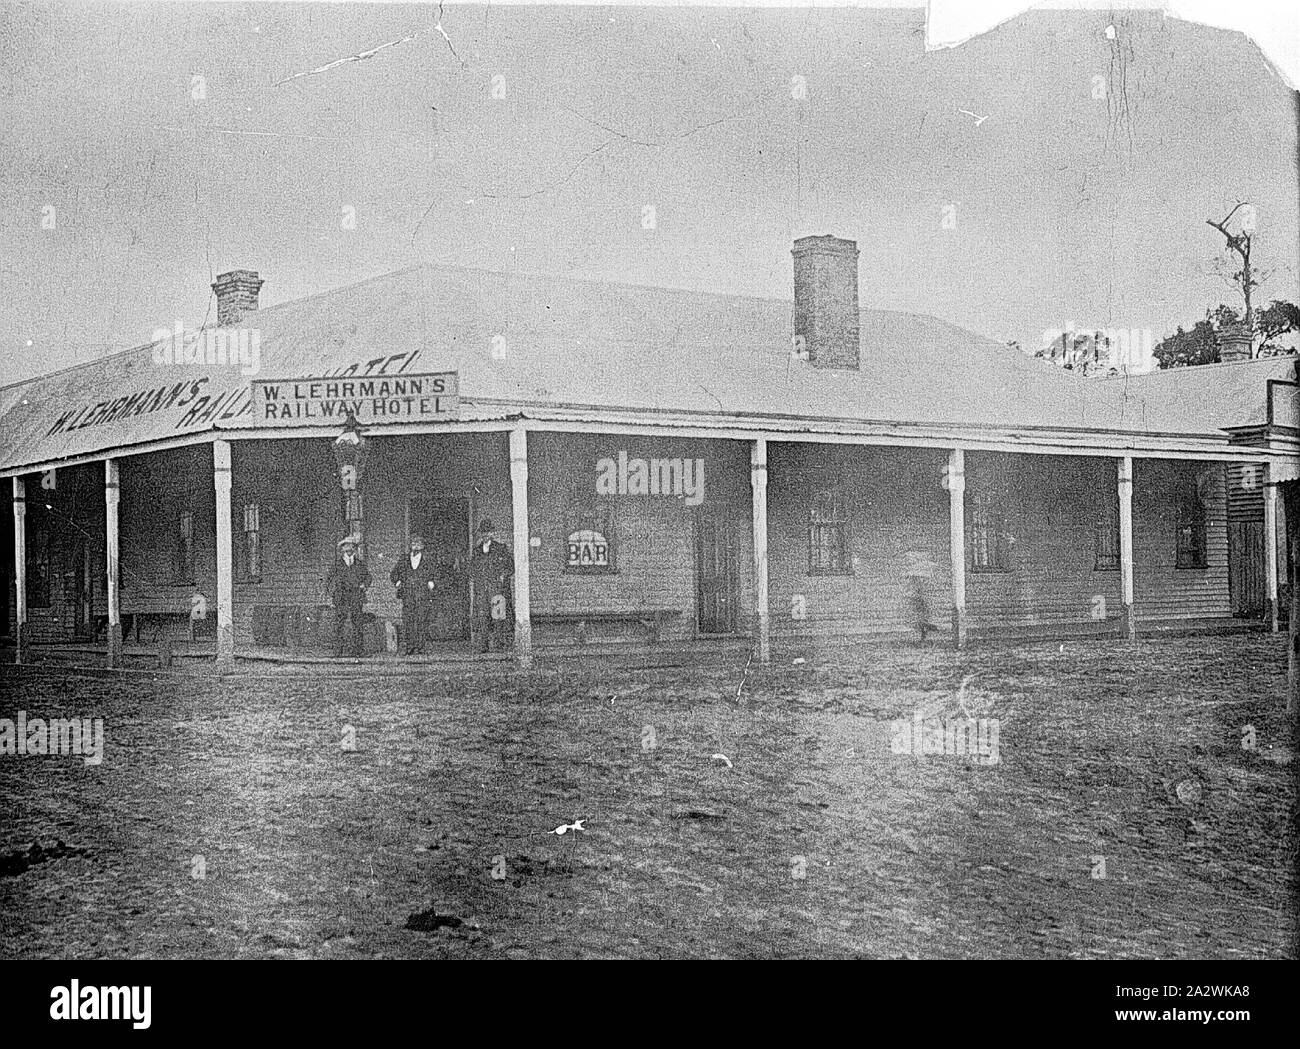 Negative - Three Men Outside W. Lehrmann's Railway Hotel, Victoria (?), circa 1895, Three men outside W. Lehrmann's Railway Hotel. The hotel is a single-story timber building with a veranda. There are three chimneys visible in the image Stock Photo